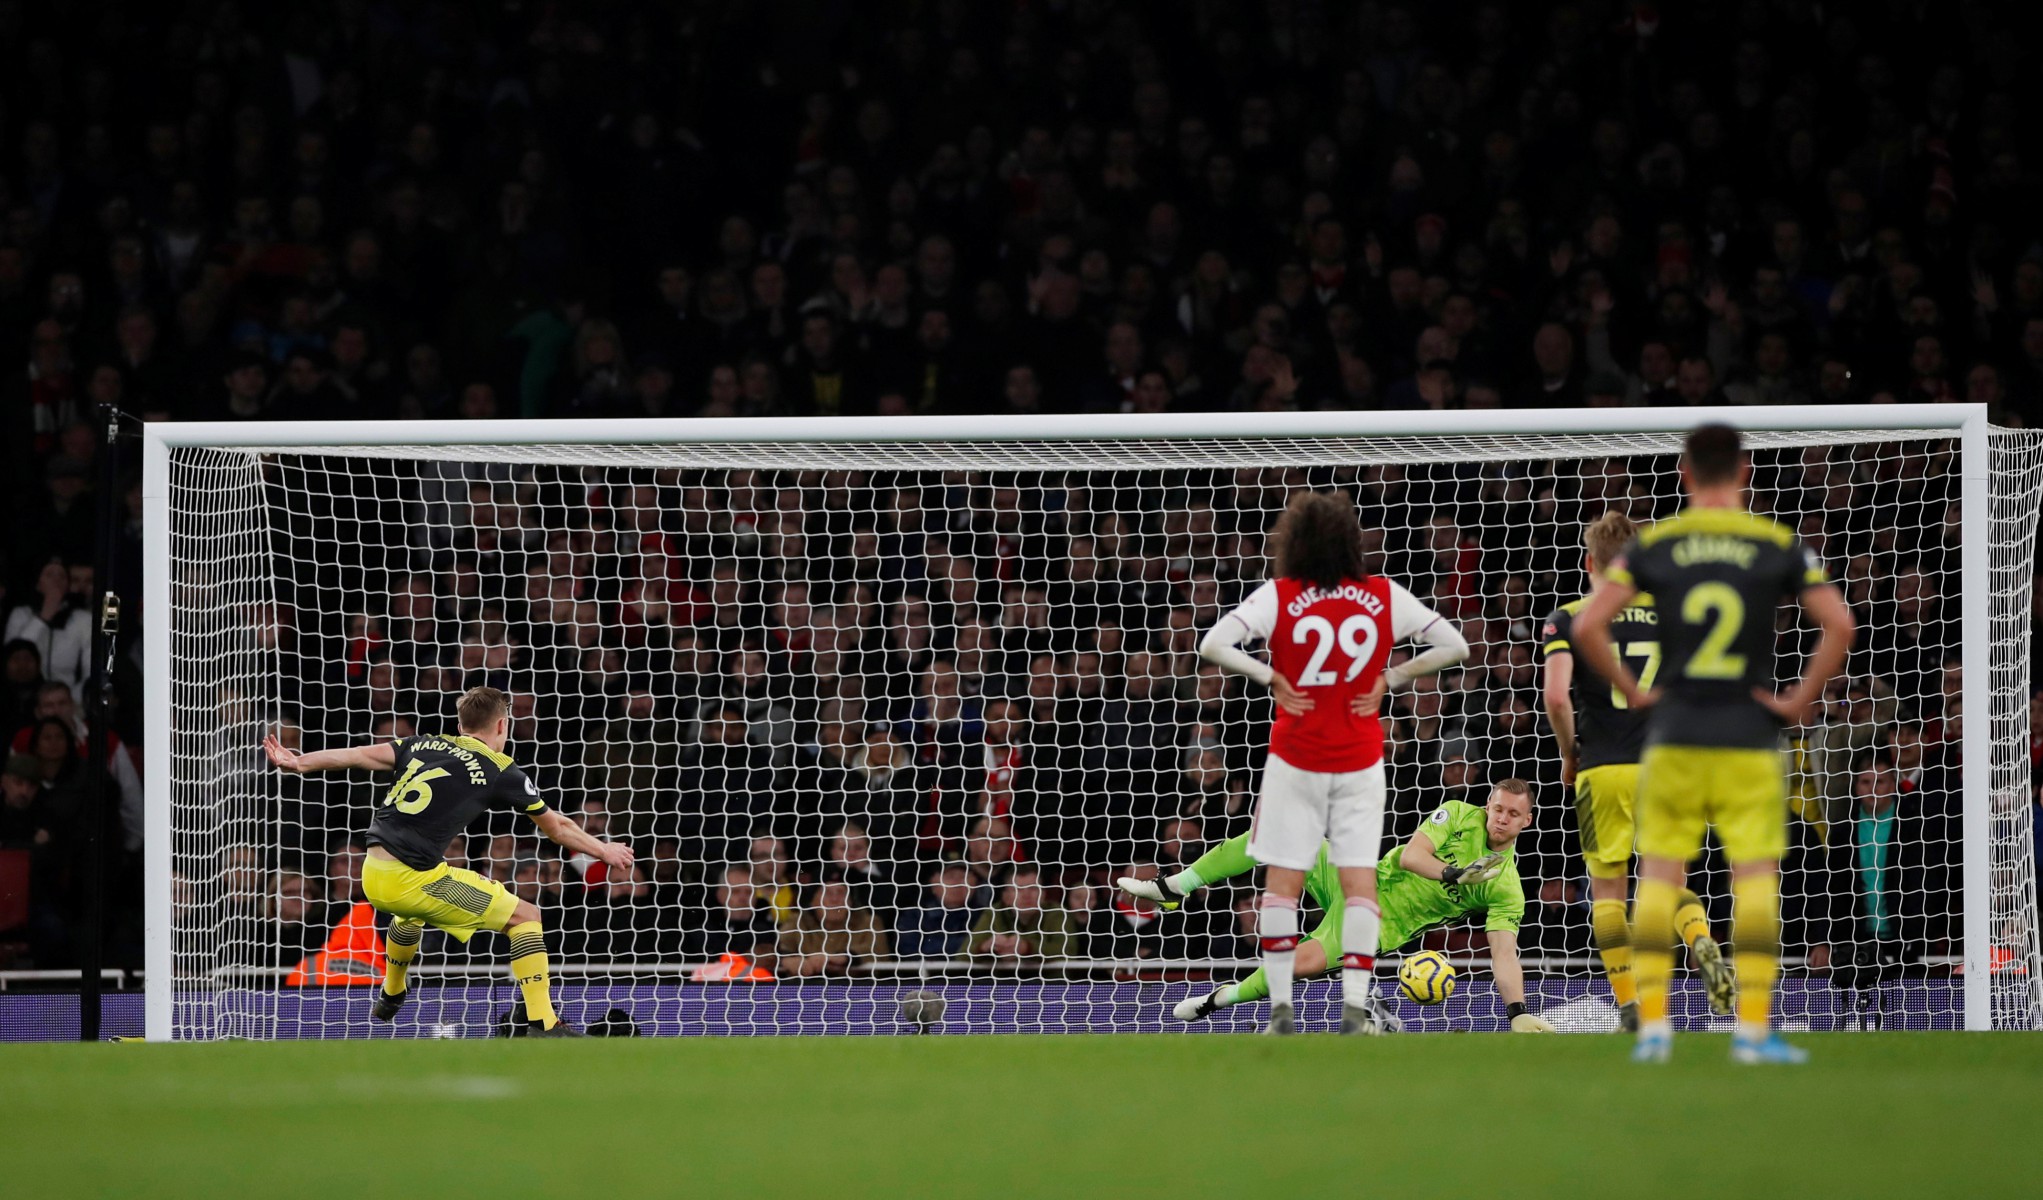 Bernd Leno went the right way to save the penalty but could do nothing about the rebound